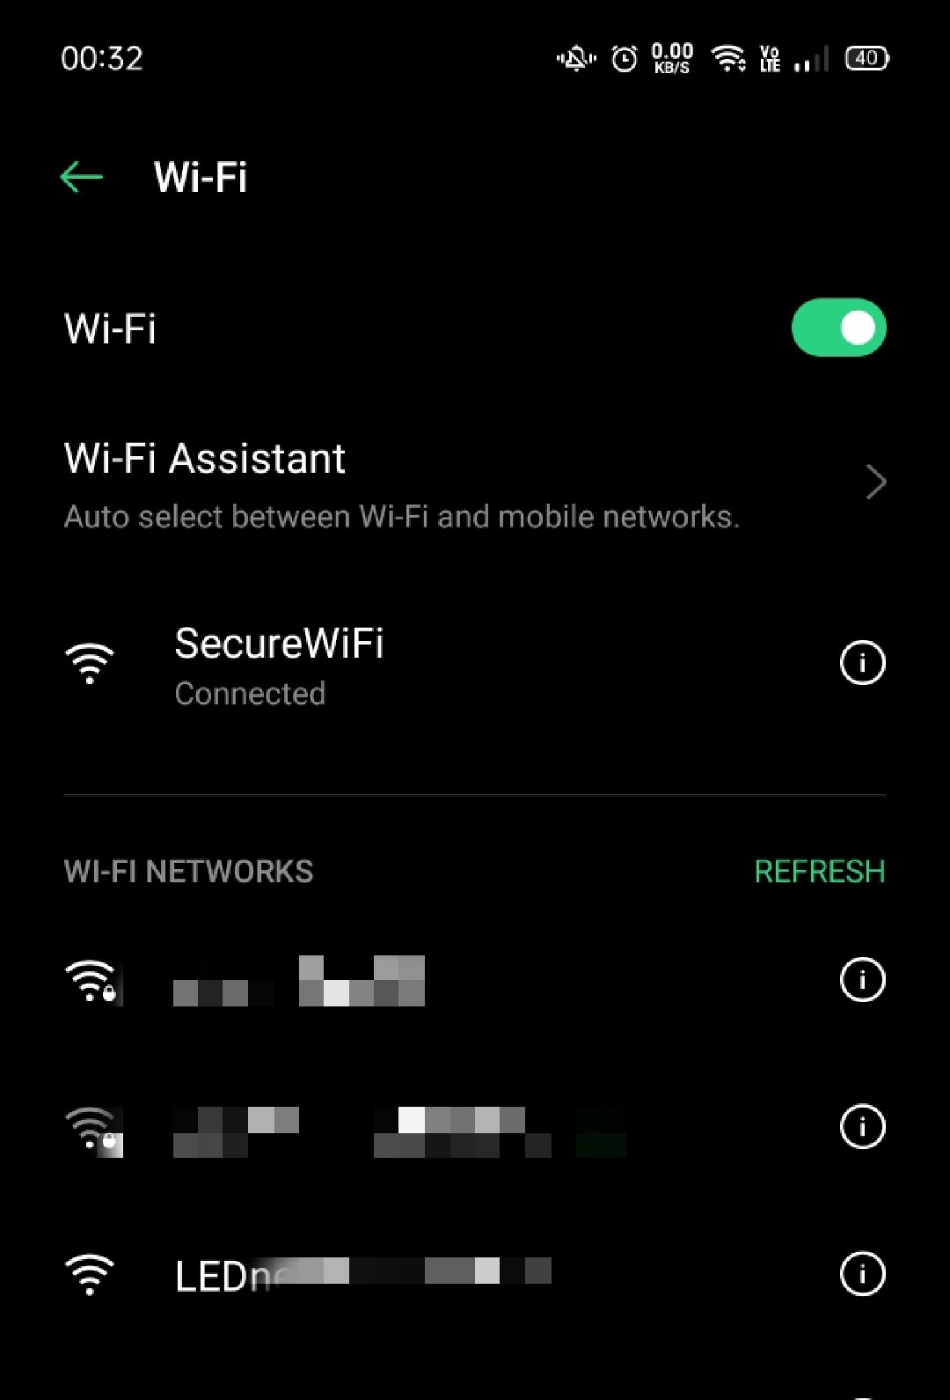 Now your WiFi name is shown